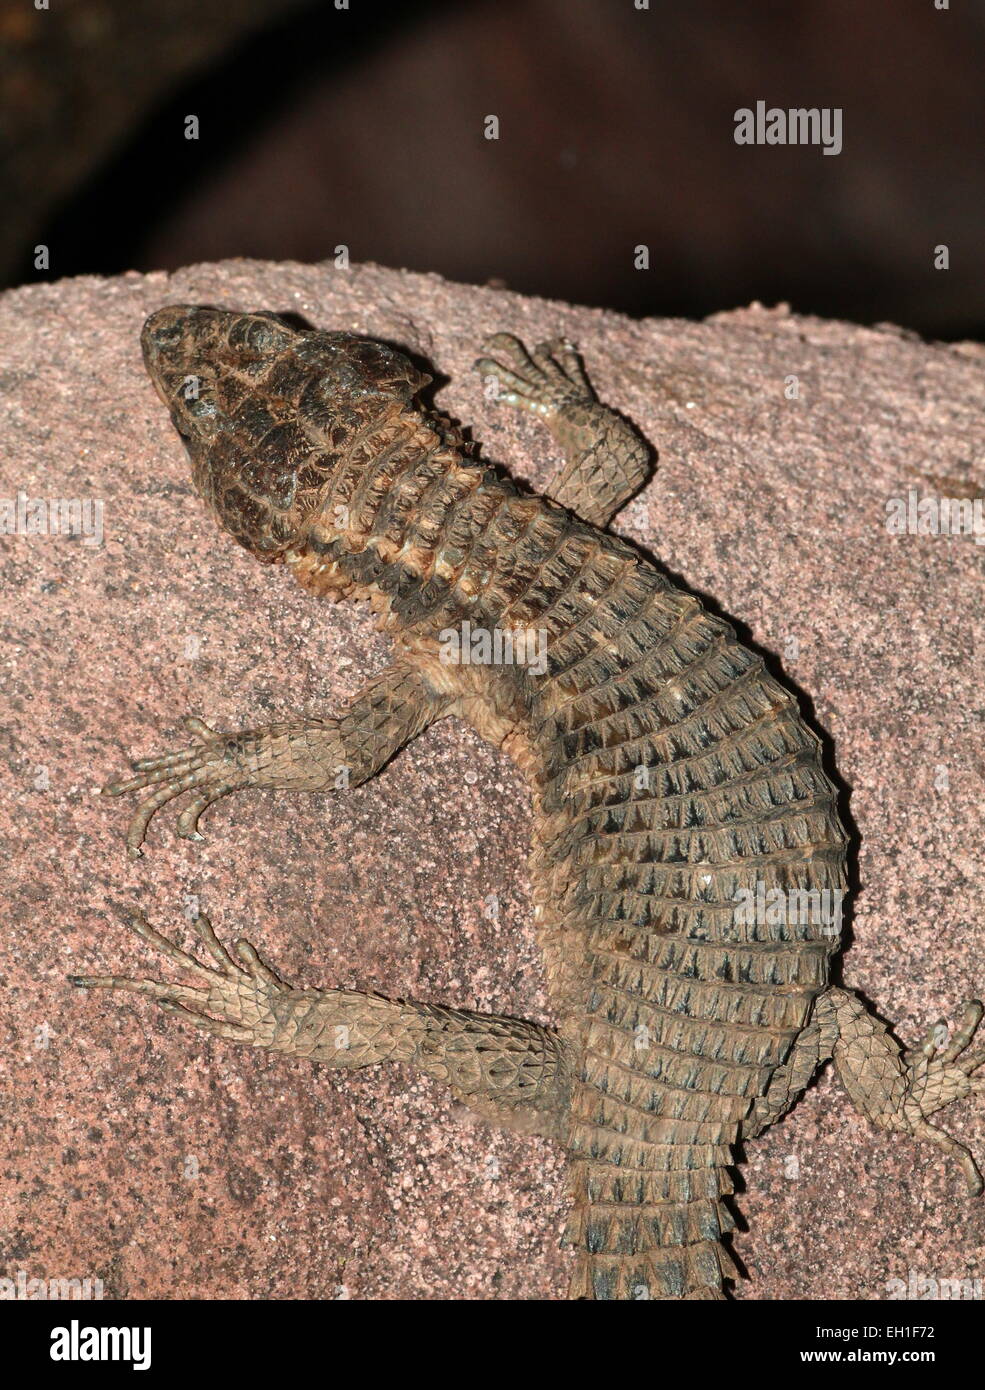 East African spiny-tailed lizard (Cordylus tropidosternum) Stock Photo